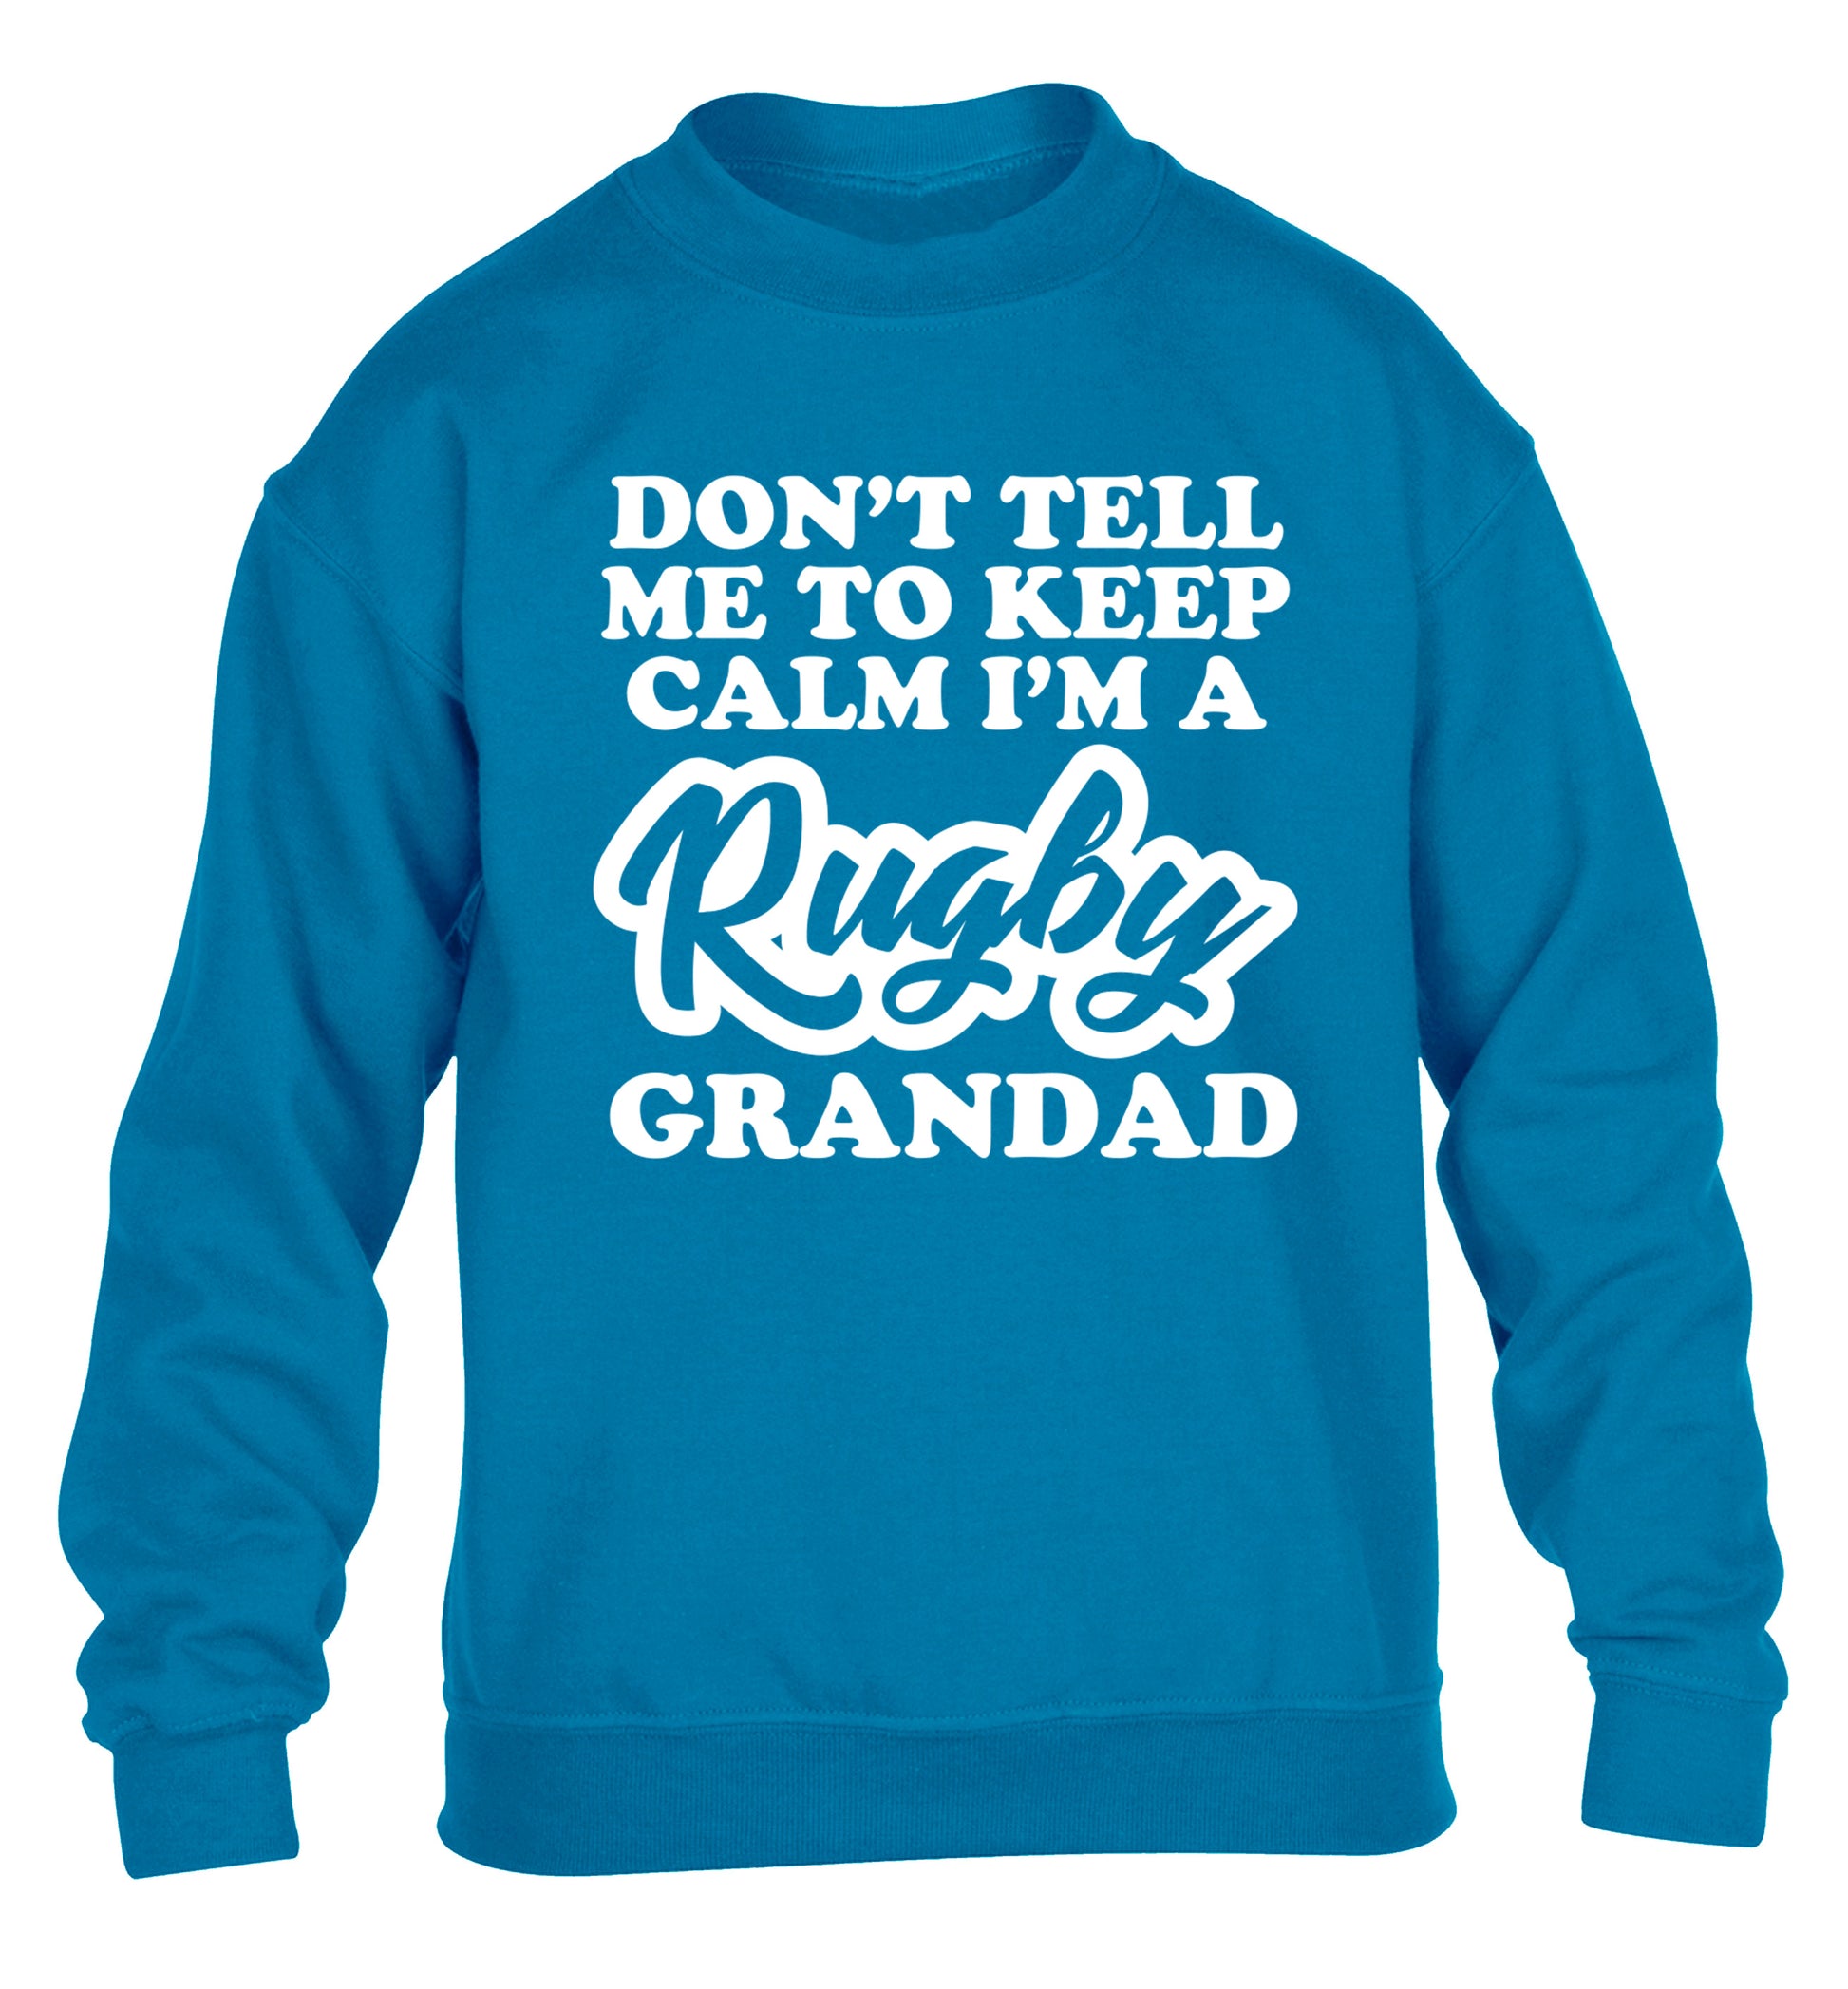 Don't tell me to keep calm I'm a rugby dad children's blue sweater 12-13 Years